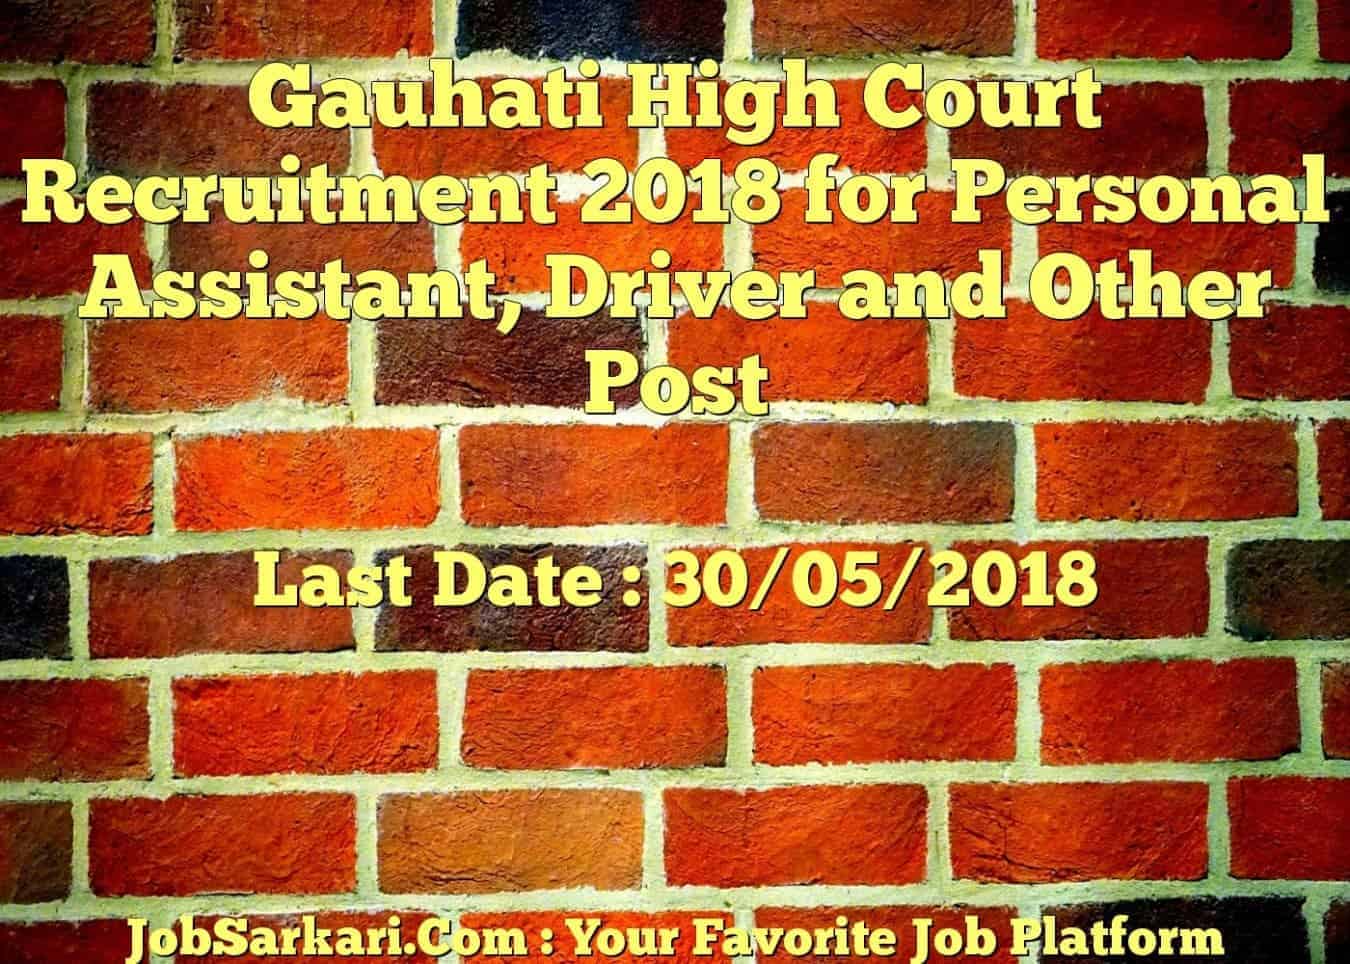 Gauhati High Court Recruitment 2018 for Personal Assistant, Driver and Other Post